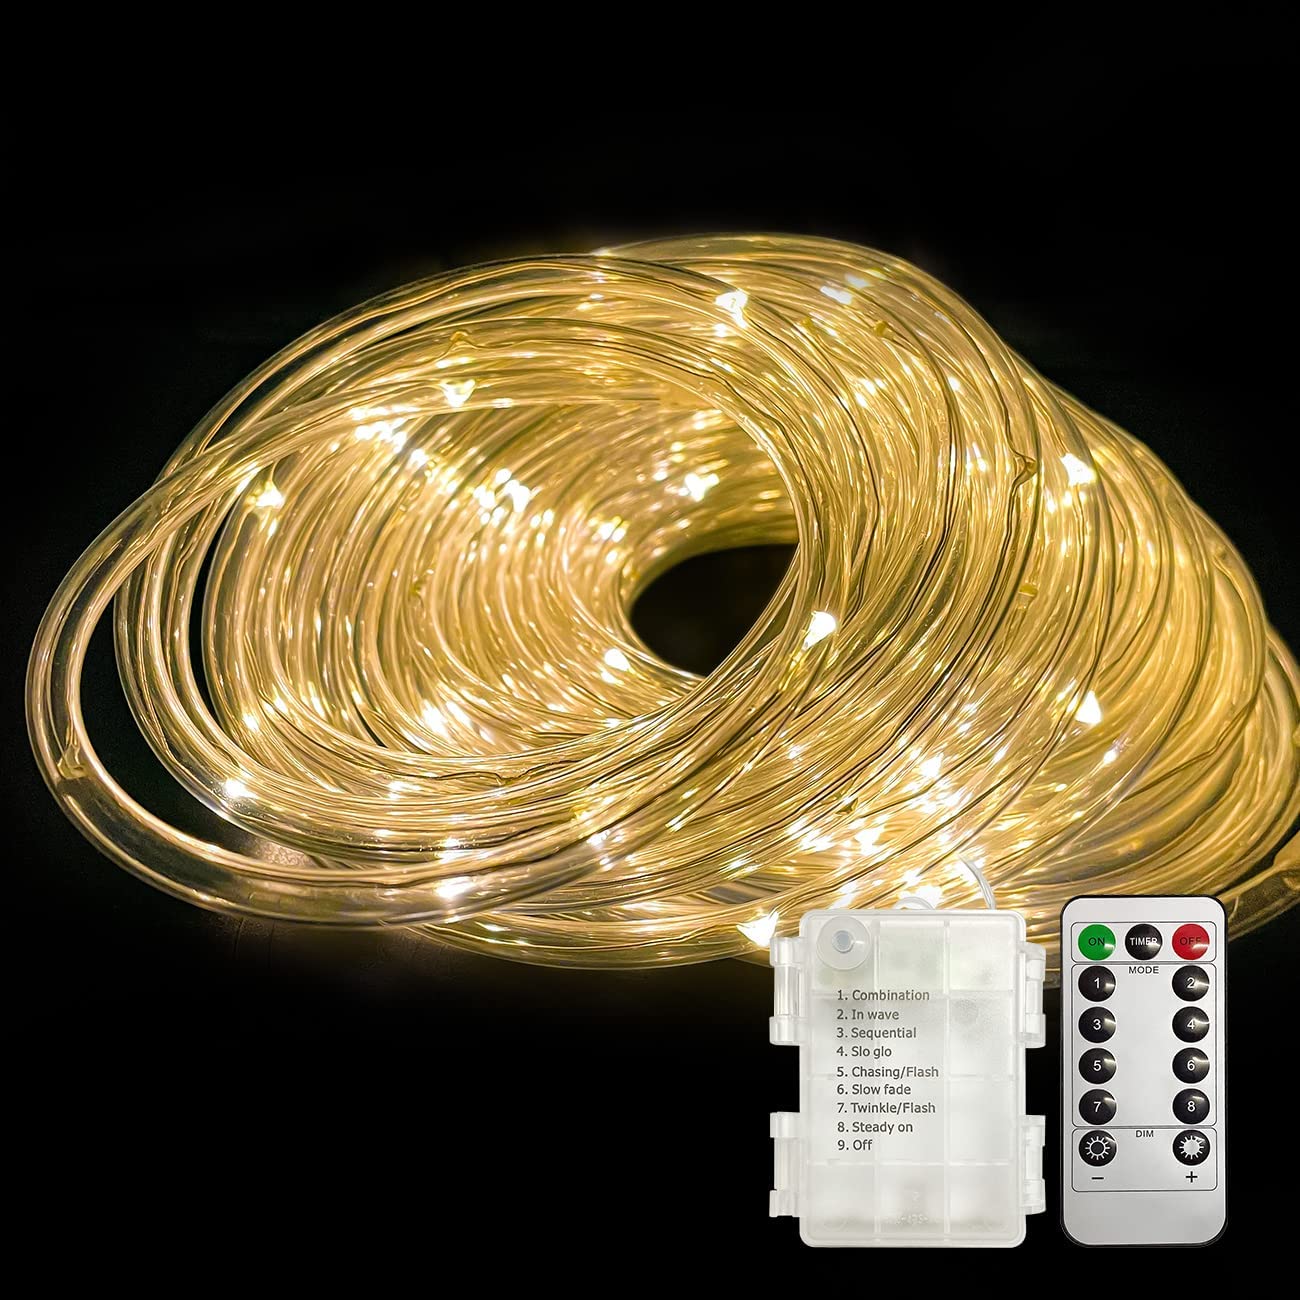 LED Rope Lights Battery Operated 8 Modes Timer Fairy String Lights with Remote,40Ft 120 LEDs Outdoor Tube Light Waterproof for Christmas Bedroom Patio Pool Garden Boat Camping Décor (Warm White)